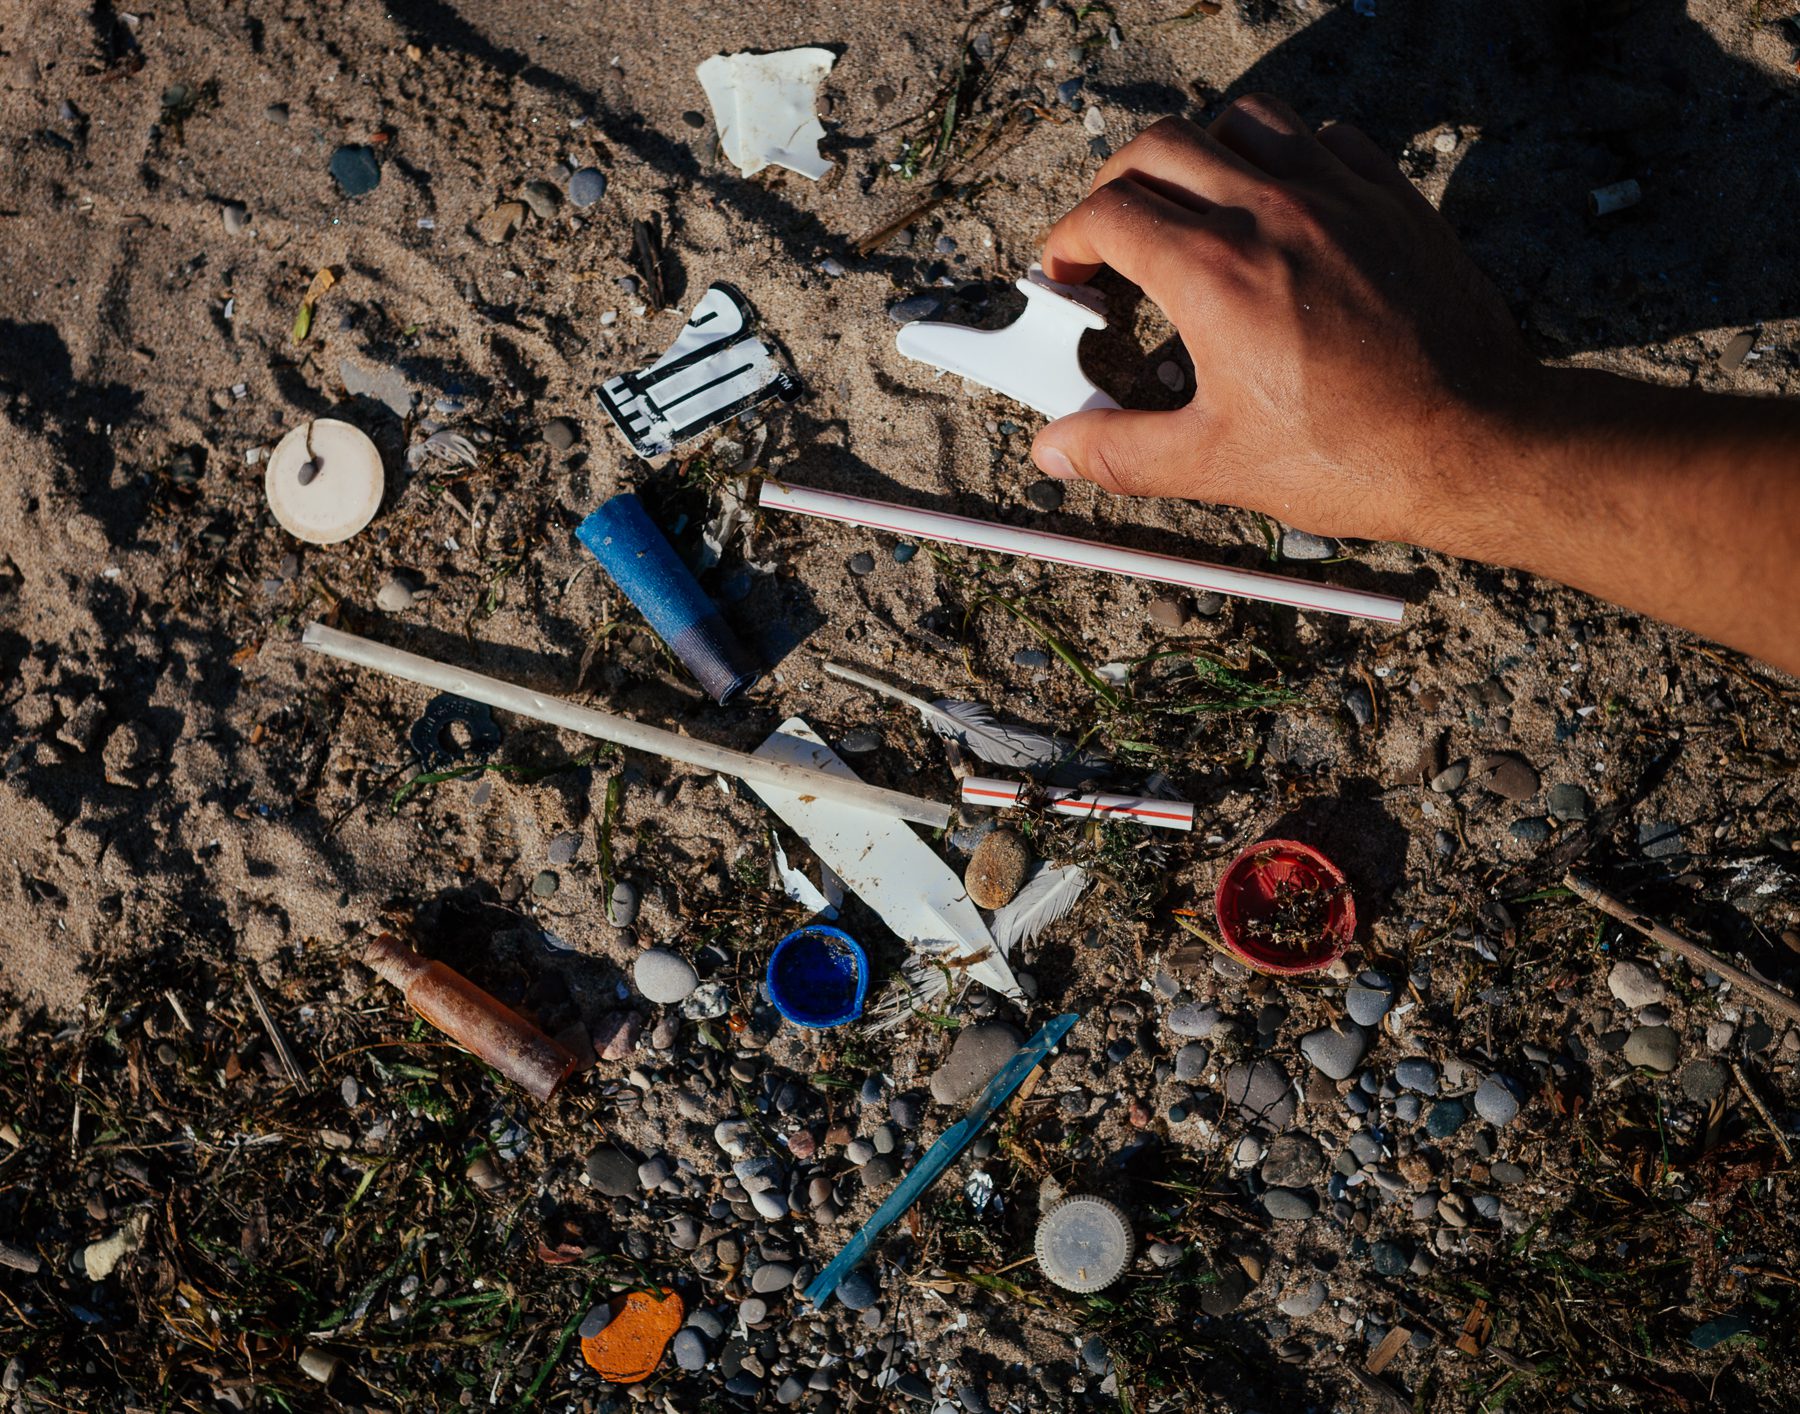 Mohamad sorts through a collection of garbage he found in less than a minute along Seacliff Beach.